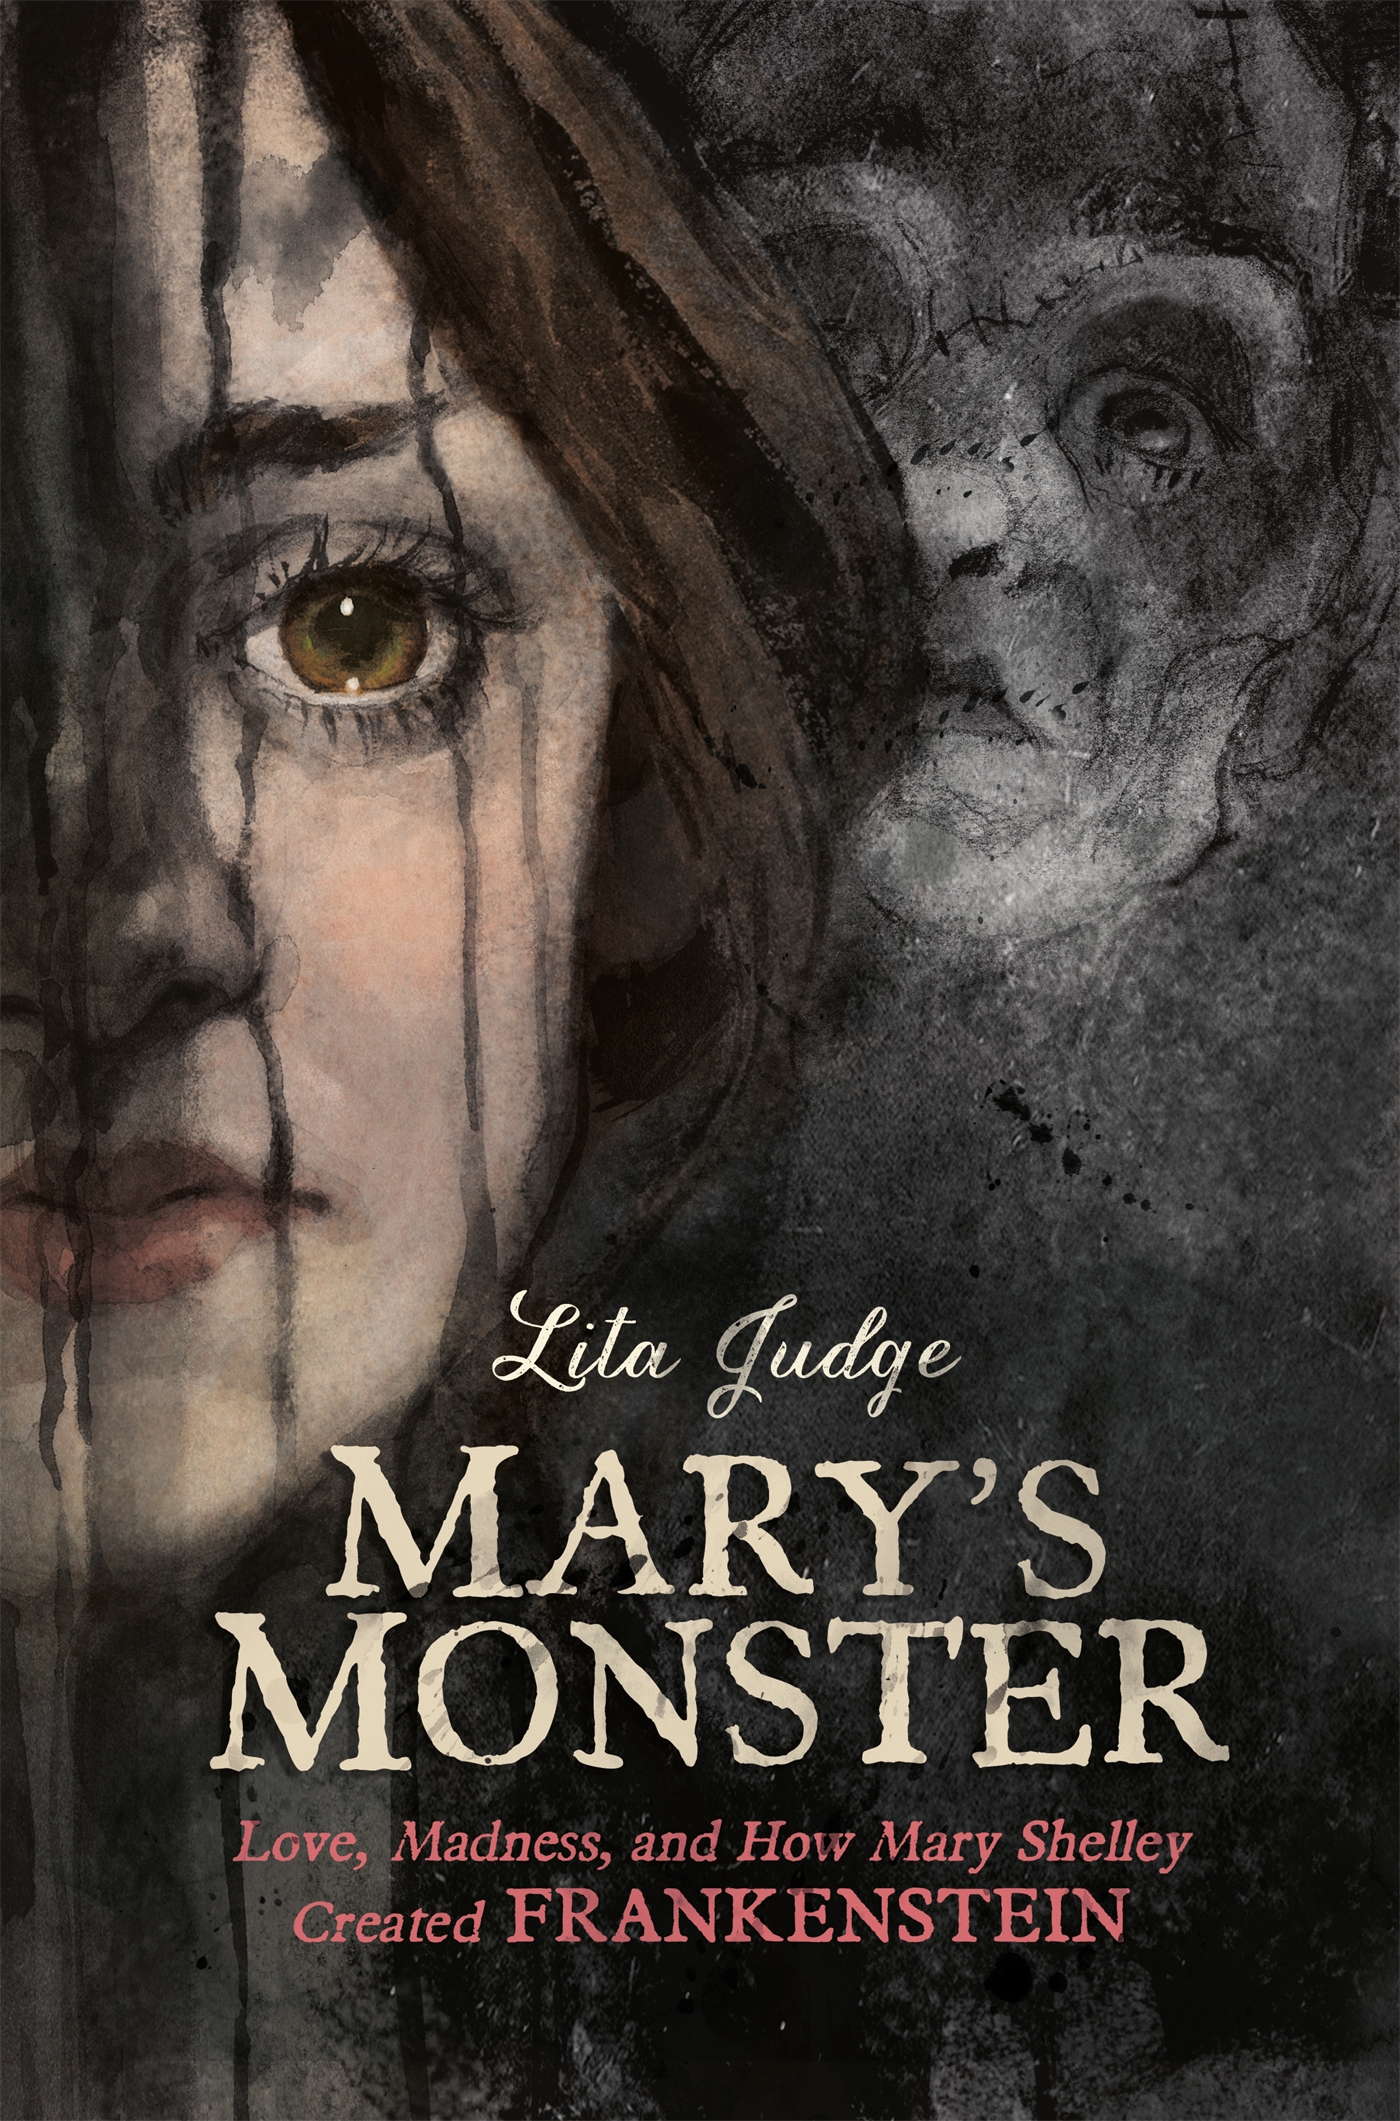 Images for Mary’s Monster